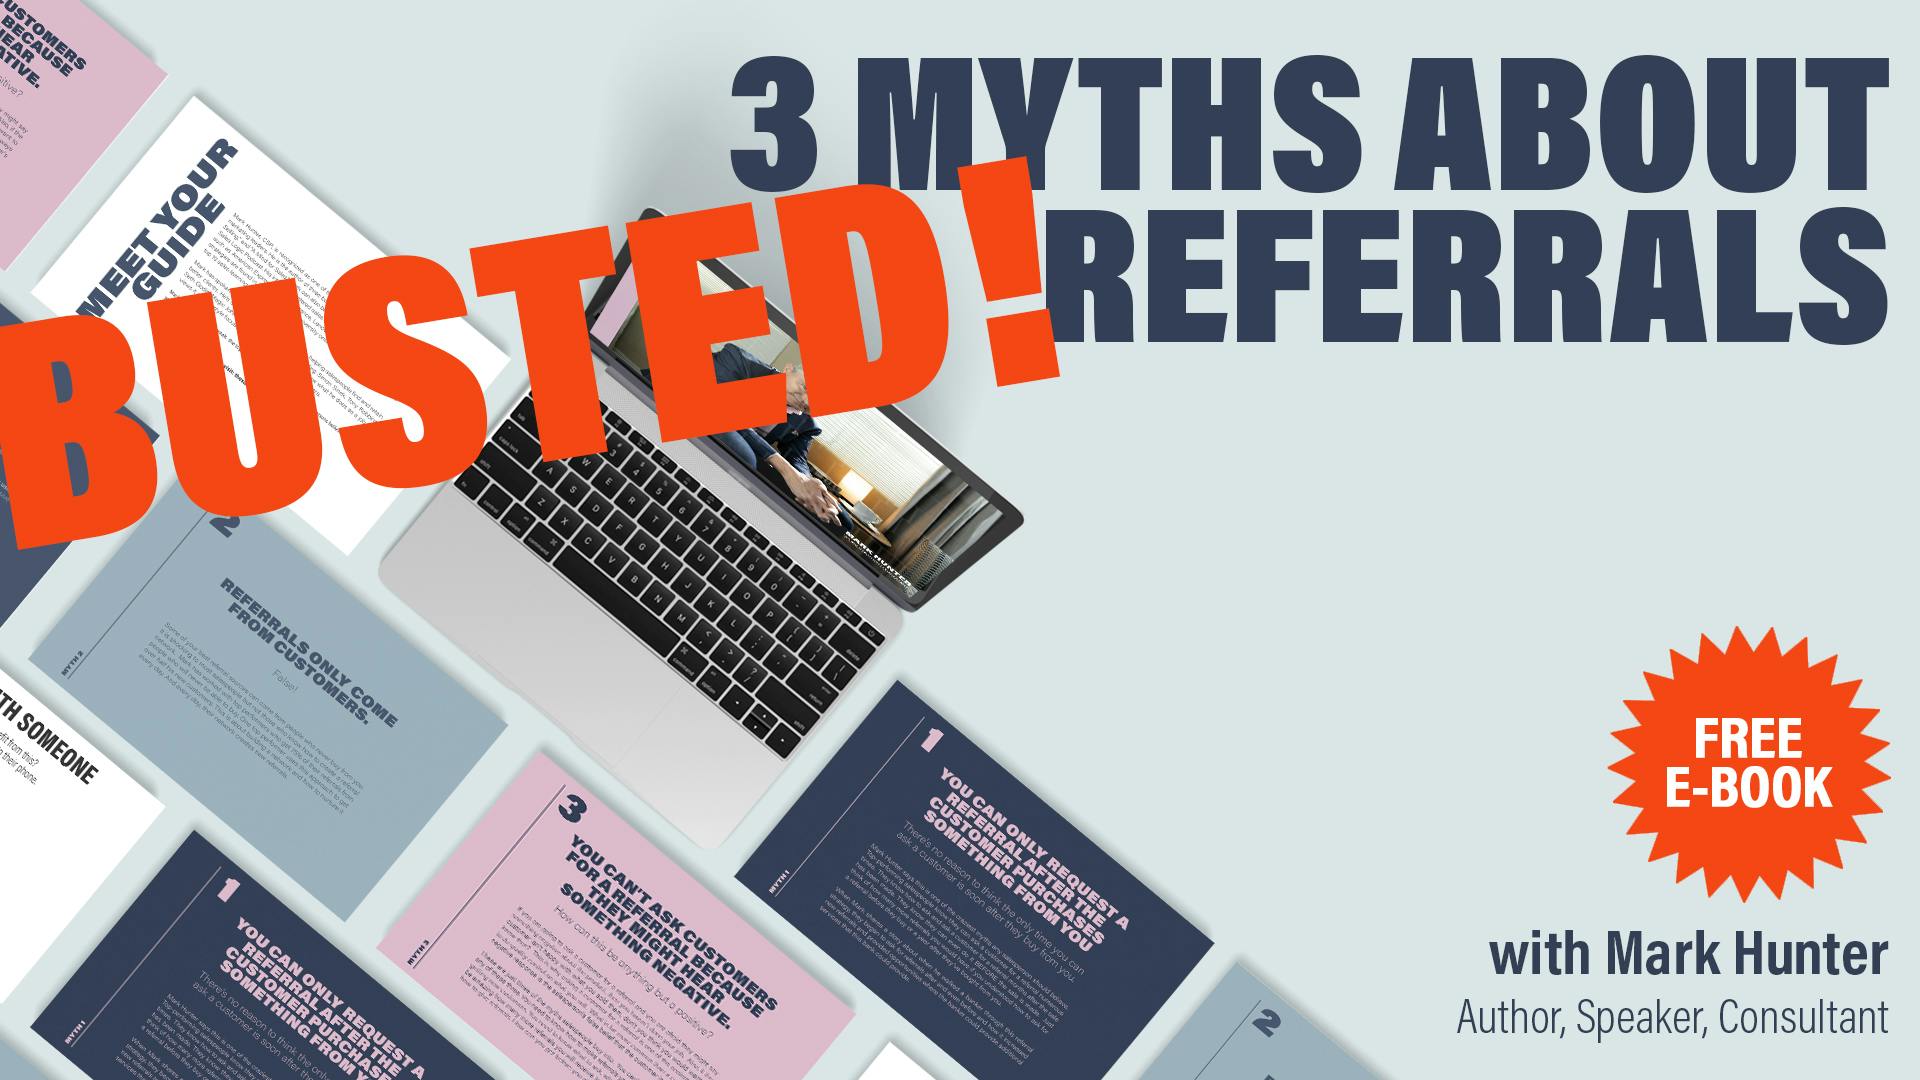 The Three Myths About Referrals